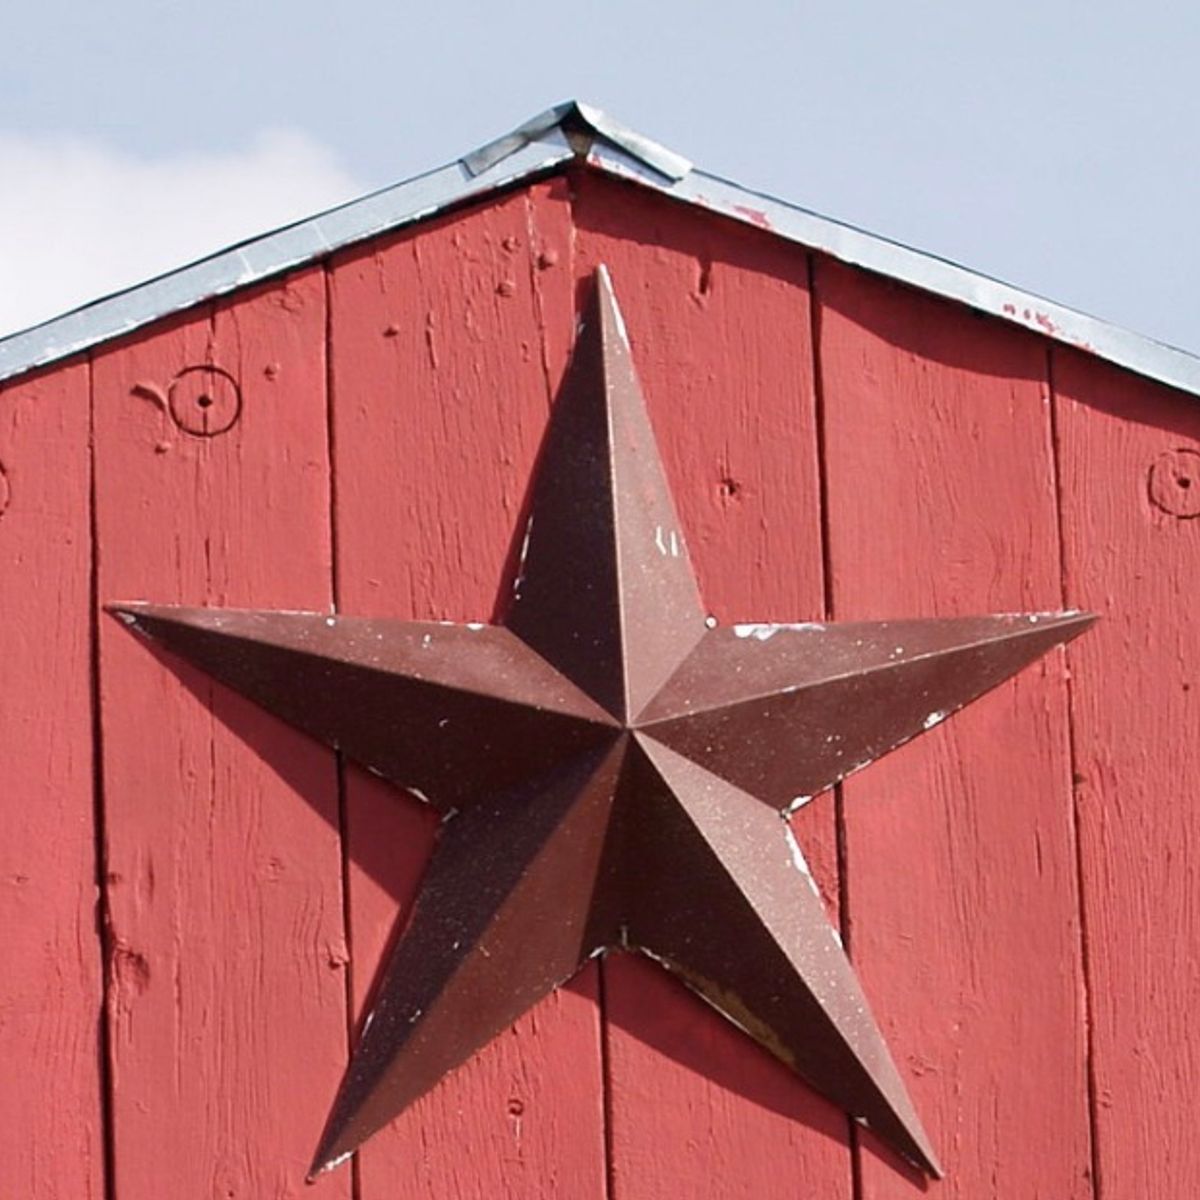 Do Stars on the Sides of Homes Indicate the Residents are Swingers? Snopes pic image